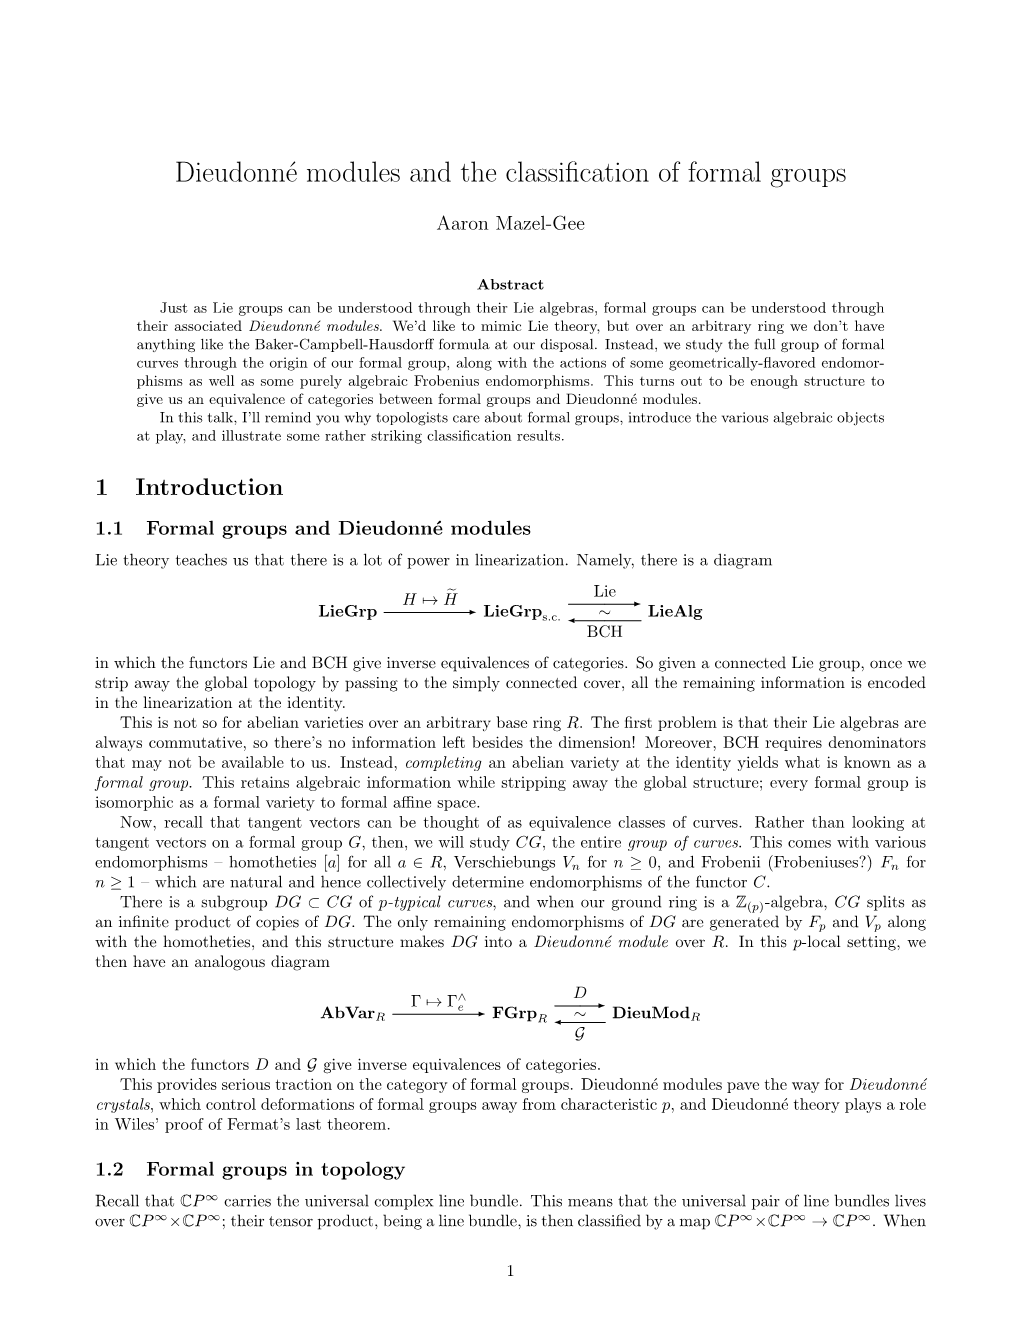 Dieudonné Modules and the Classification of Formal Groups